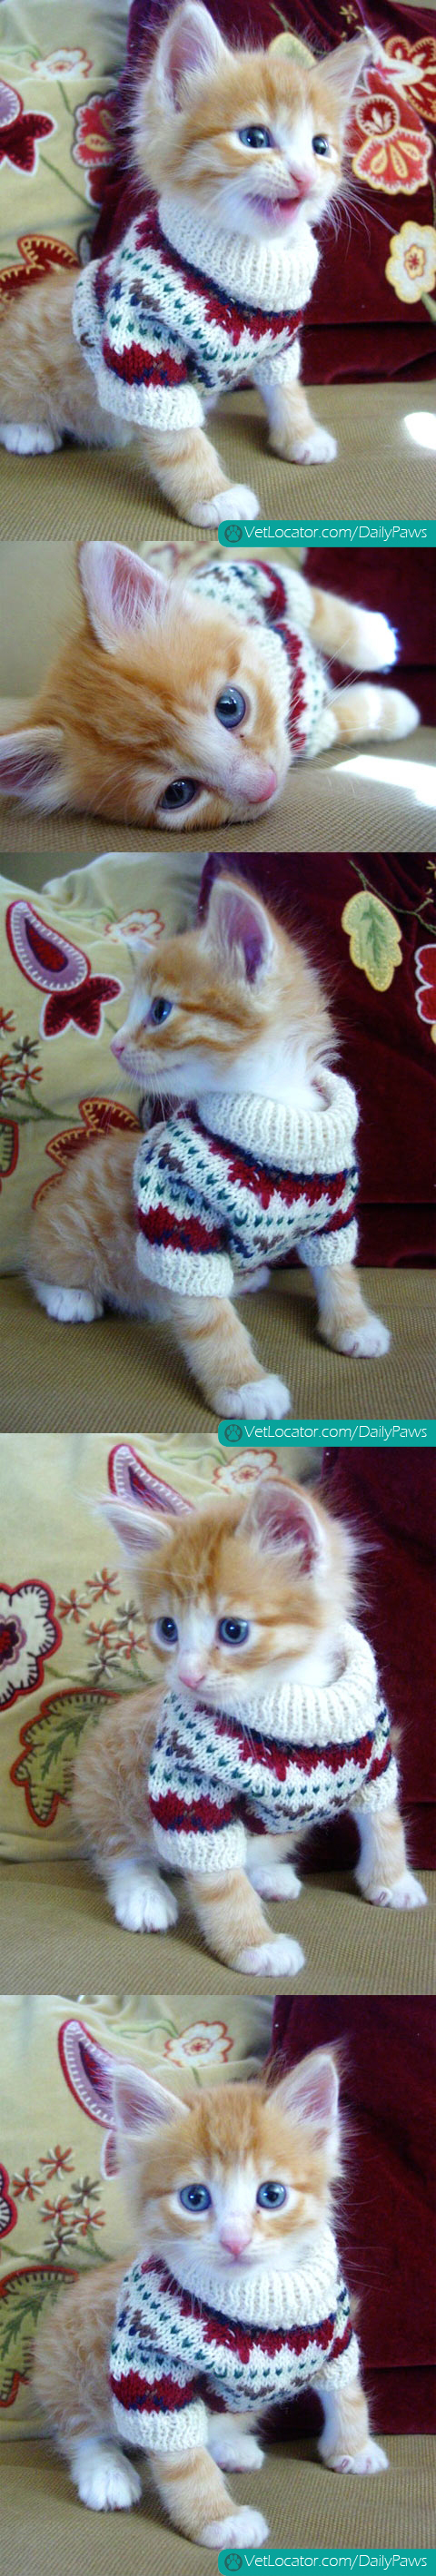 Adorable Kitten in a Sweater